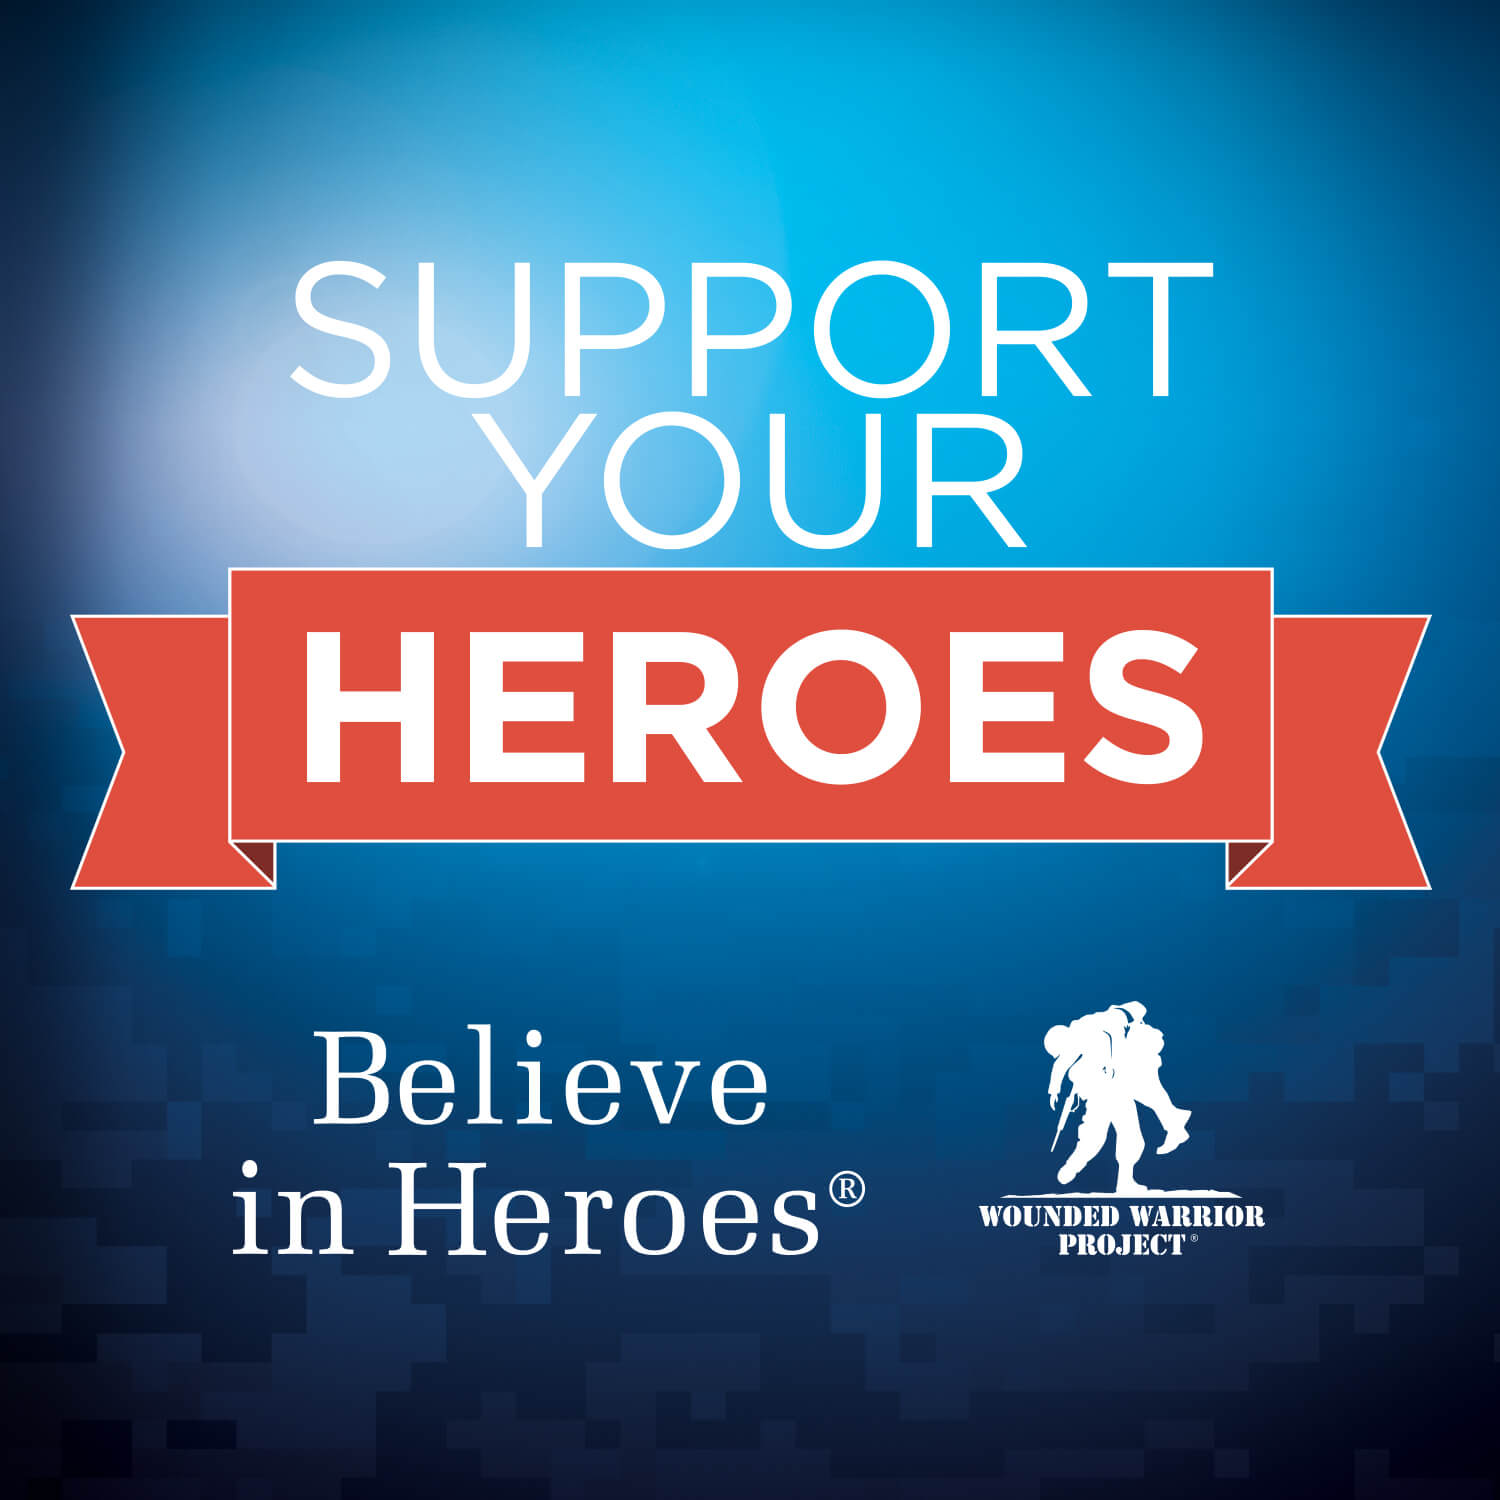 Believe in Heroes: Supporting Wounded Warriors Through Grocery Shopping